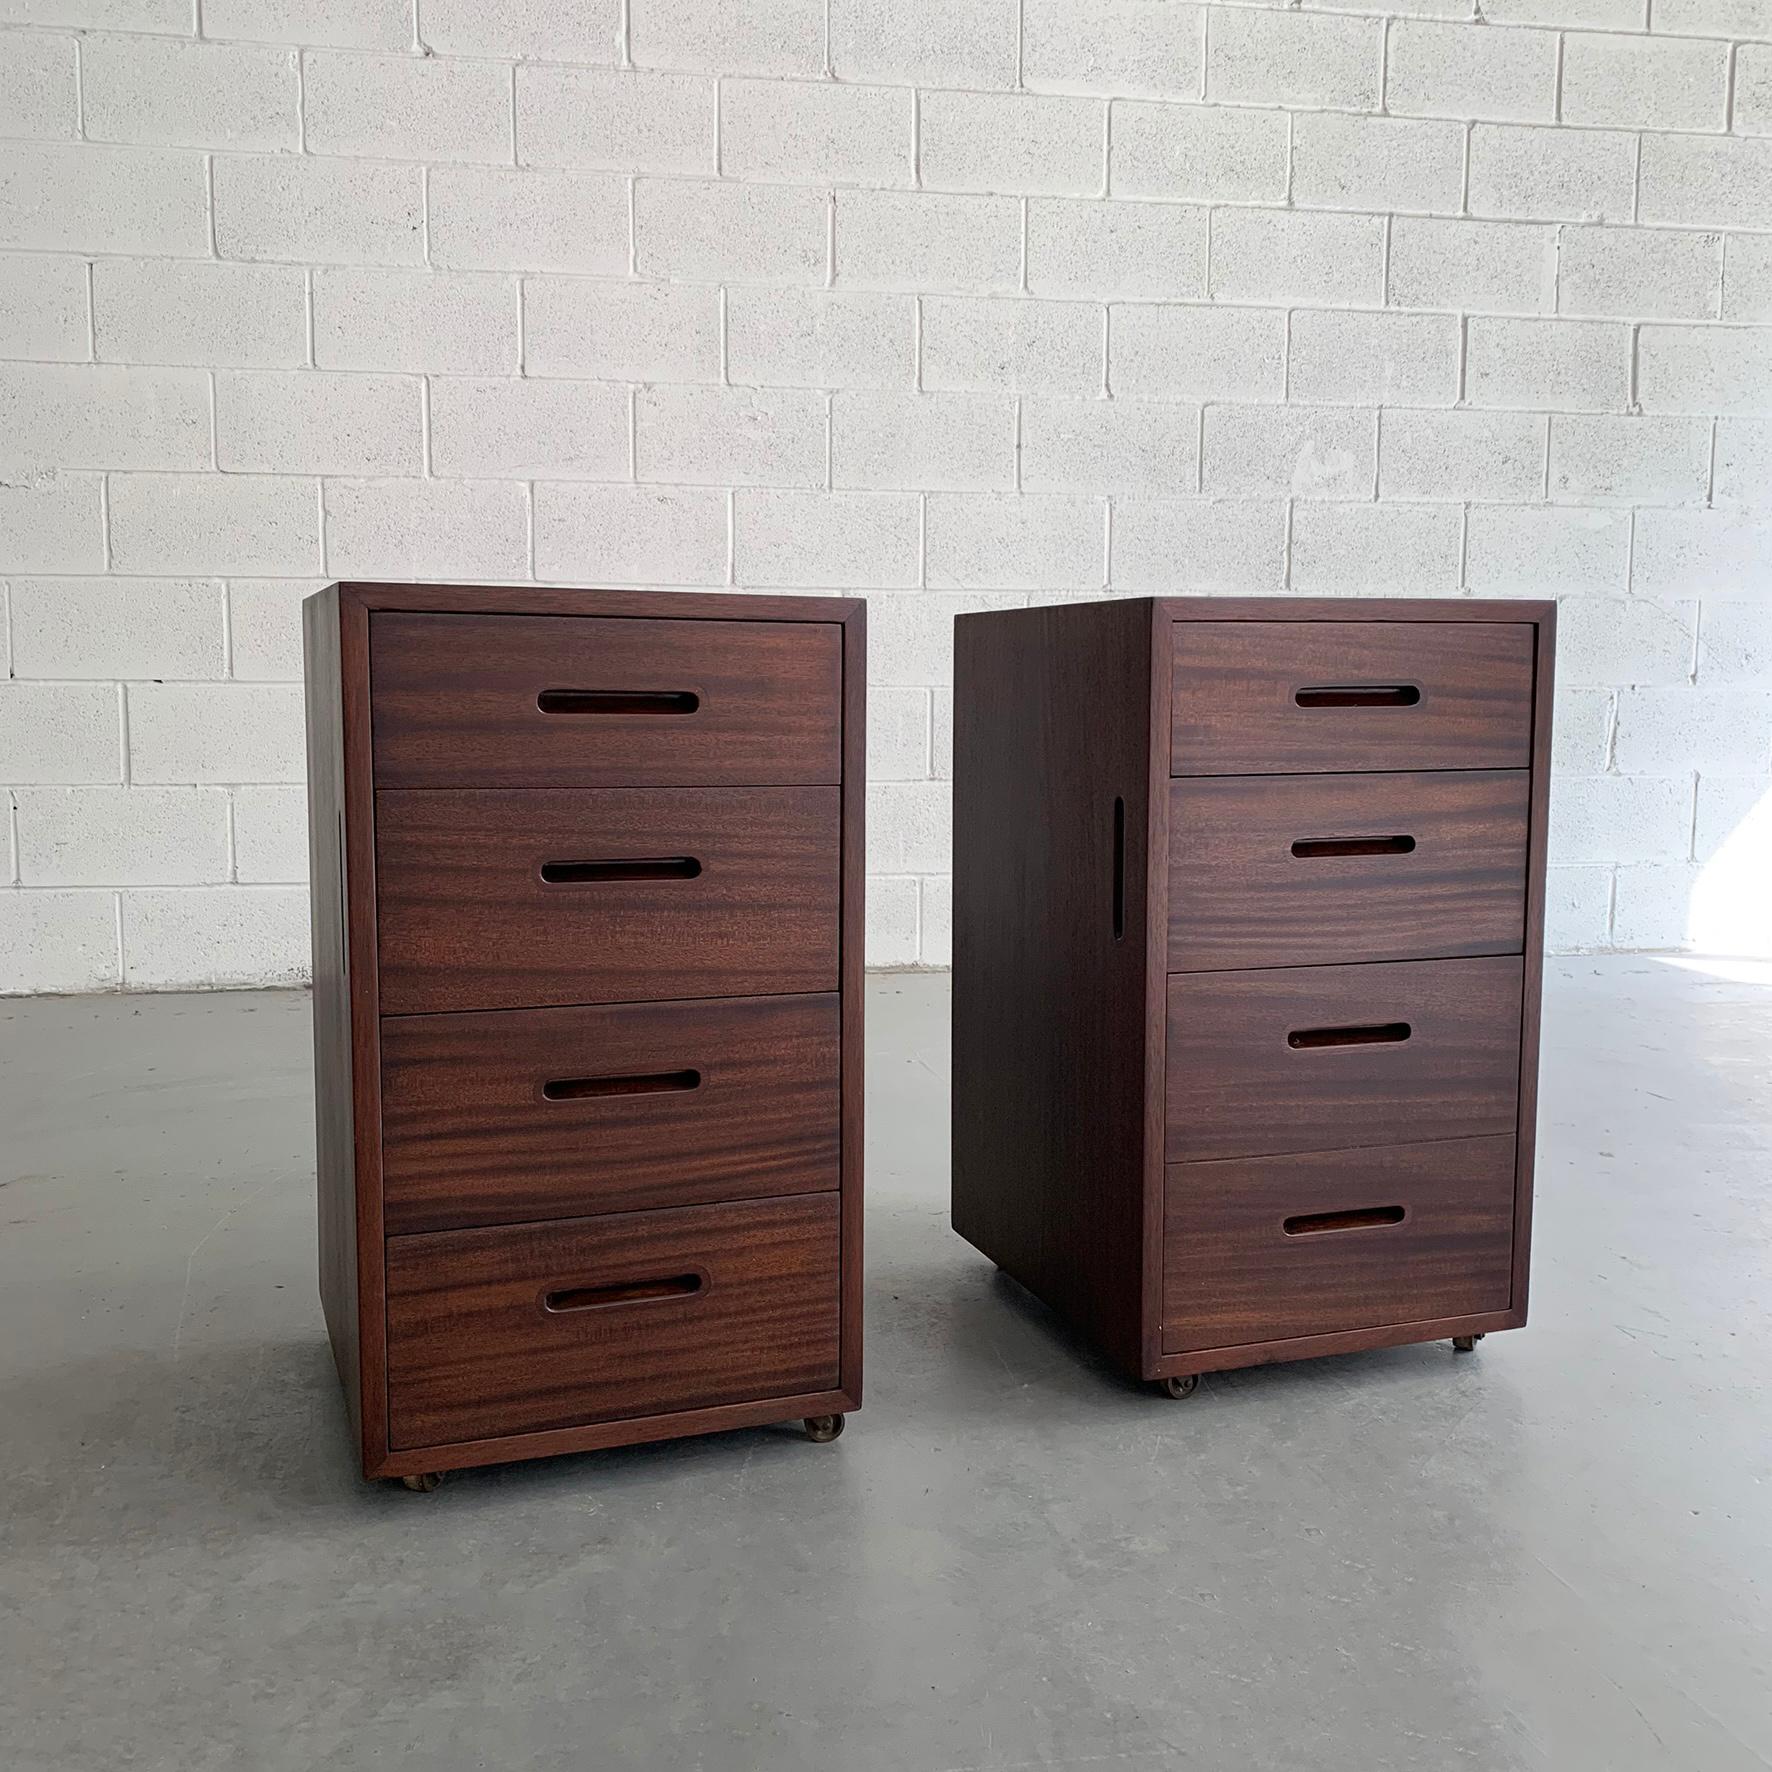 Pair of handsome, Mid-Century Modern, rolling, mahogany, filing cabinets attributed to Edward Wormley for Dunbar feature recessed handles on their 4 drawers and on their sides for mobility. The 3 bottom drawers measure 6.75 inches height and the top